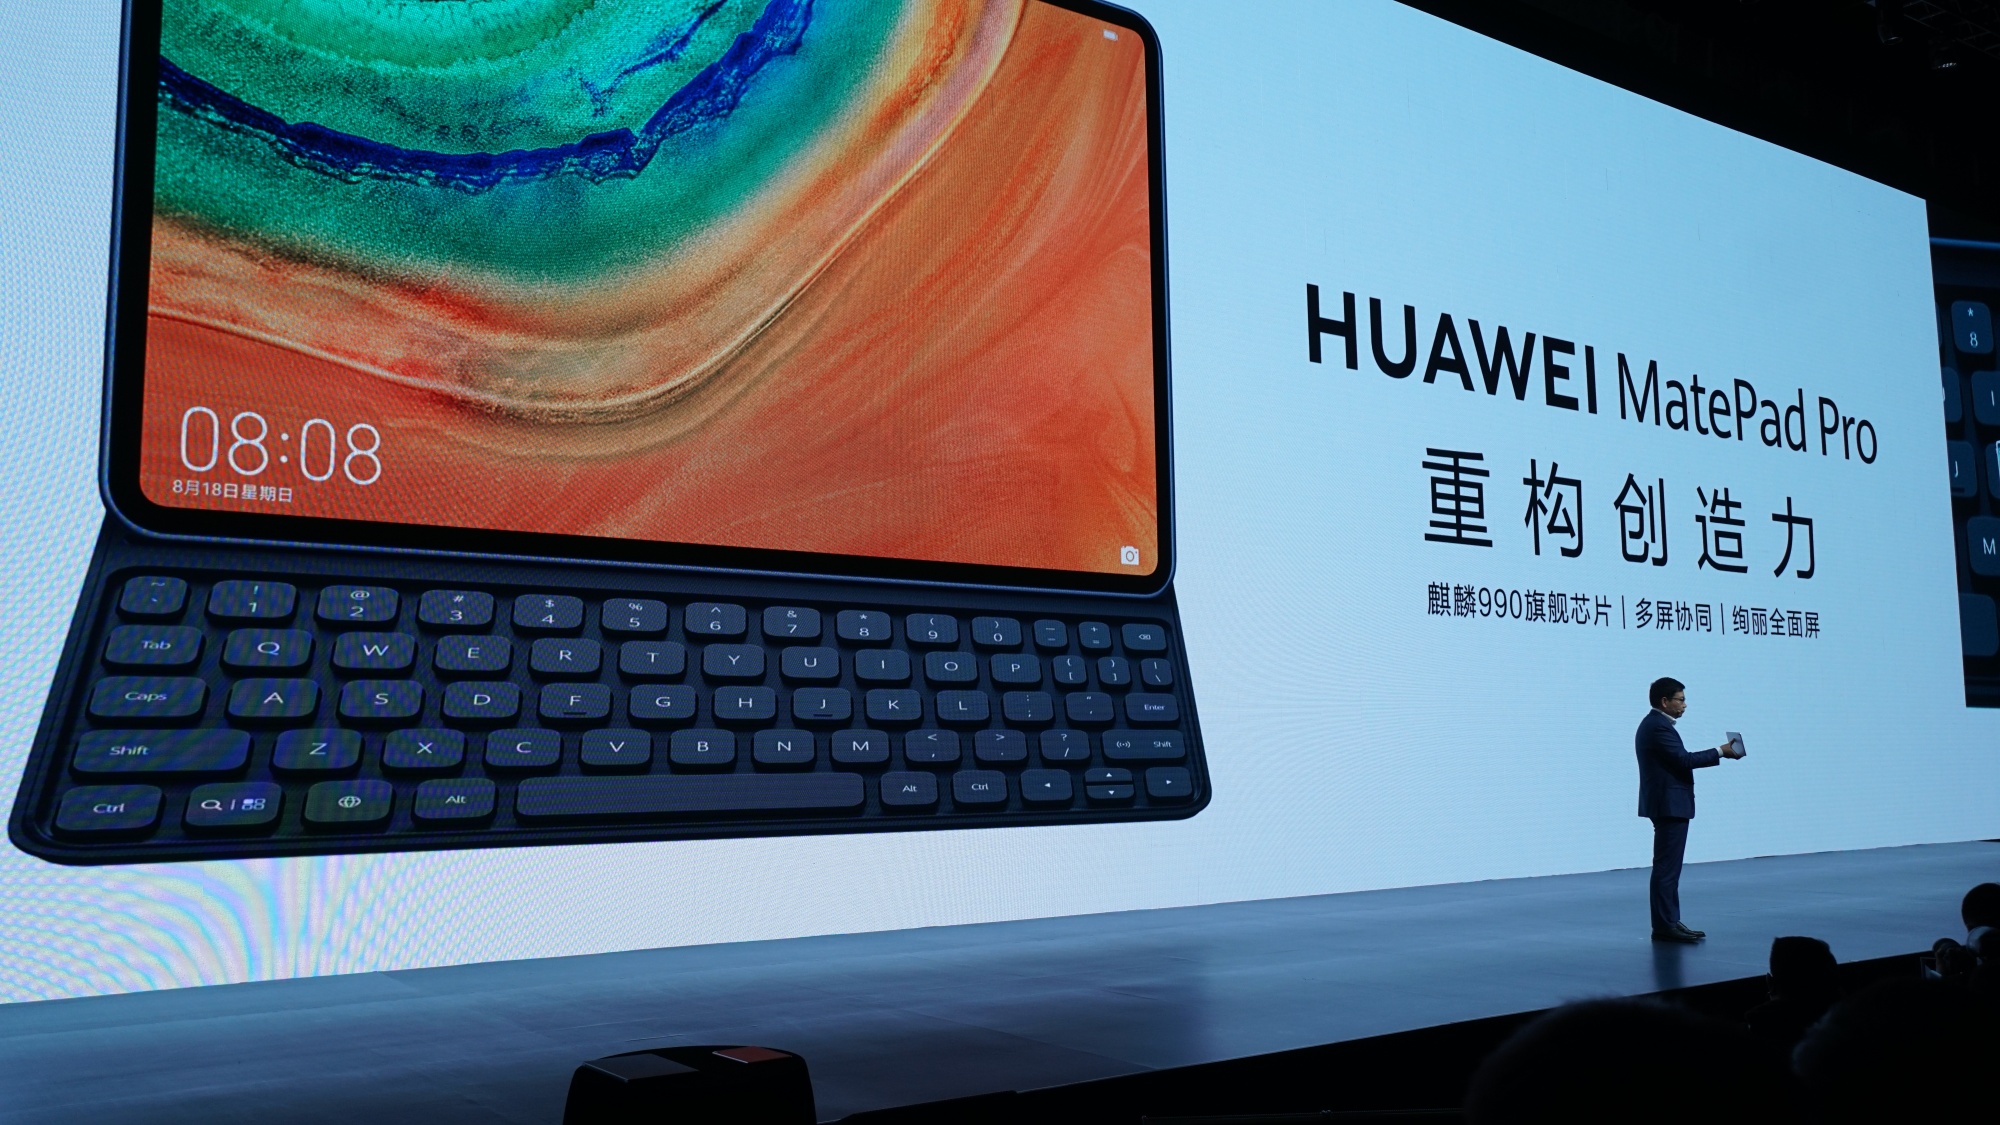 Richard Yu, chief executive officer of Huawei Technologies Co., unveils non-5G MatePad Pro tablet,&nbsp;previously available in China, in Shanghai on Nov. 25.&nbsp;